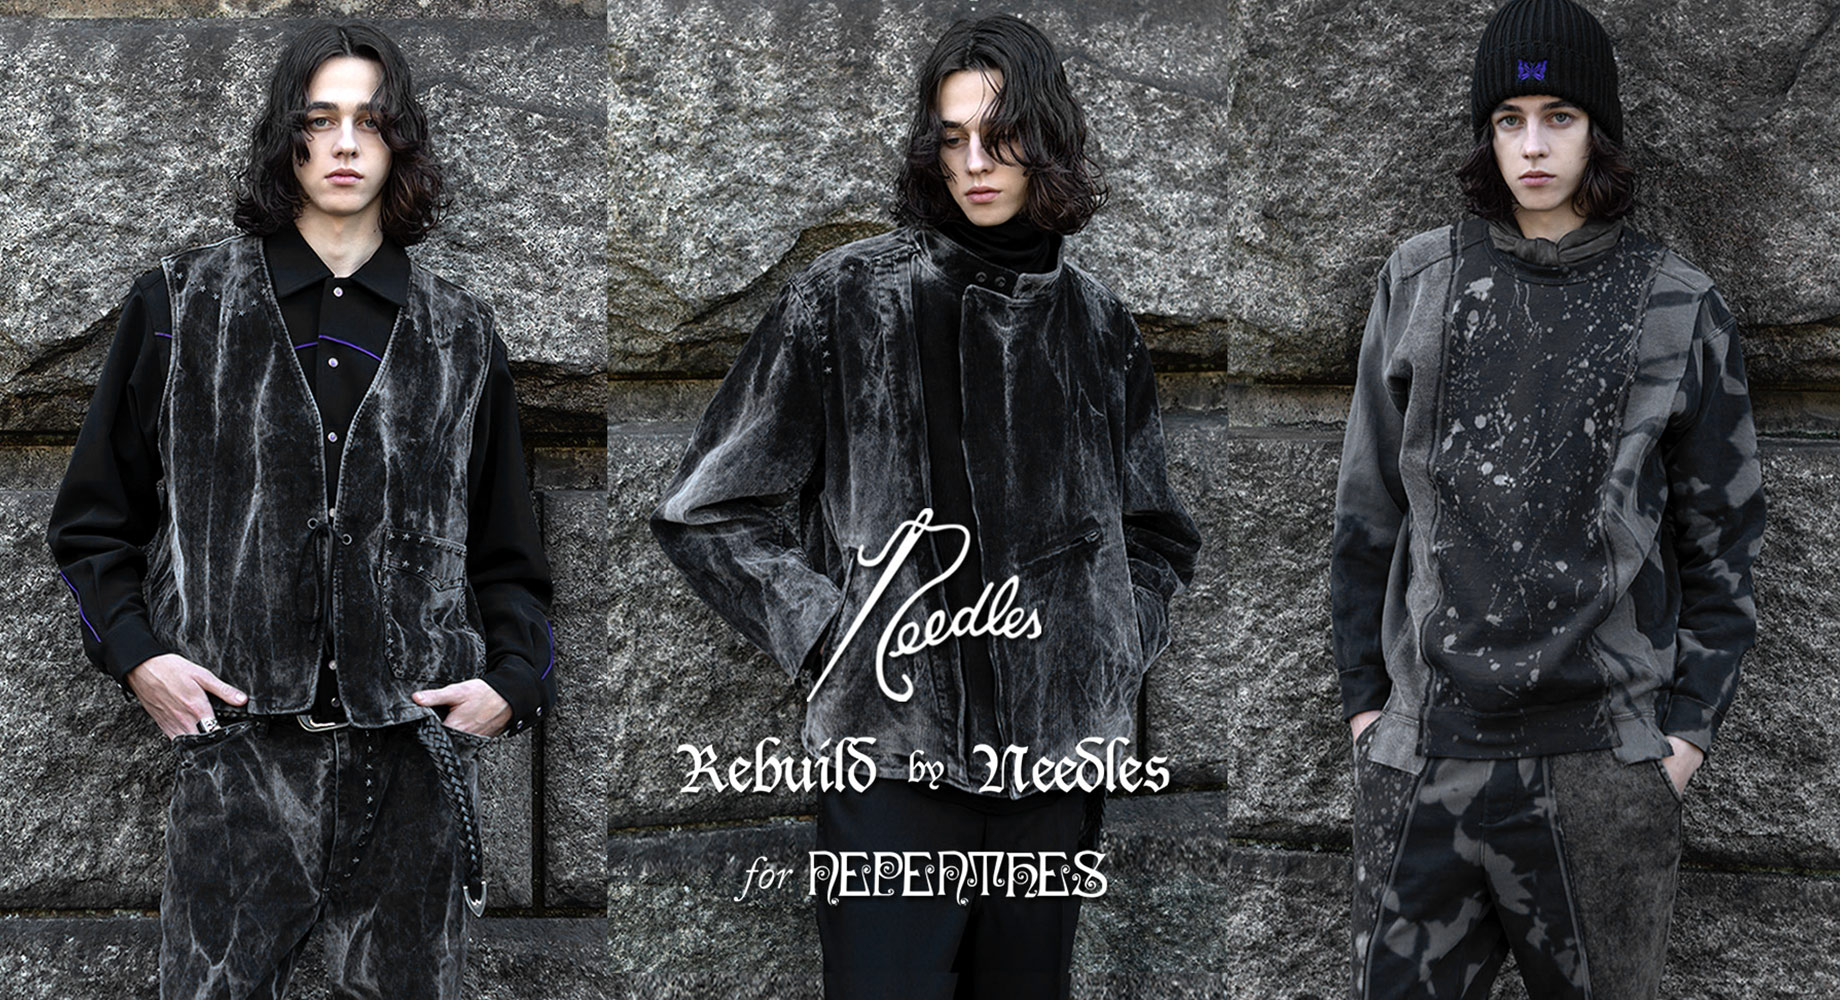 〈NEEDLES〉&〈REBUILD by NEEDLES〉SPECIAL RELEASE for NEPENTHES 12.10 （SAT）11:00 JST - ON SALE